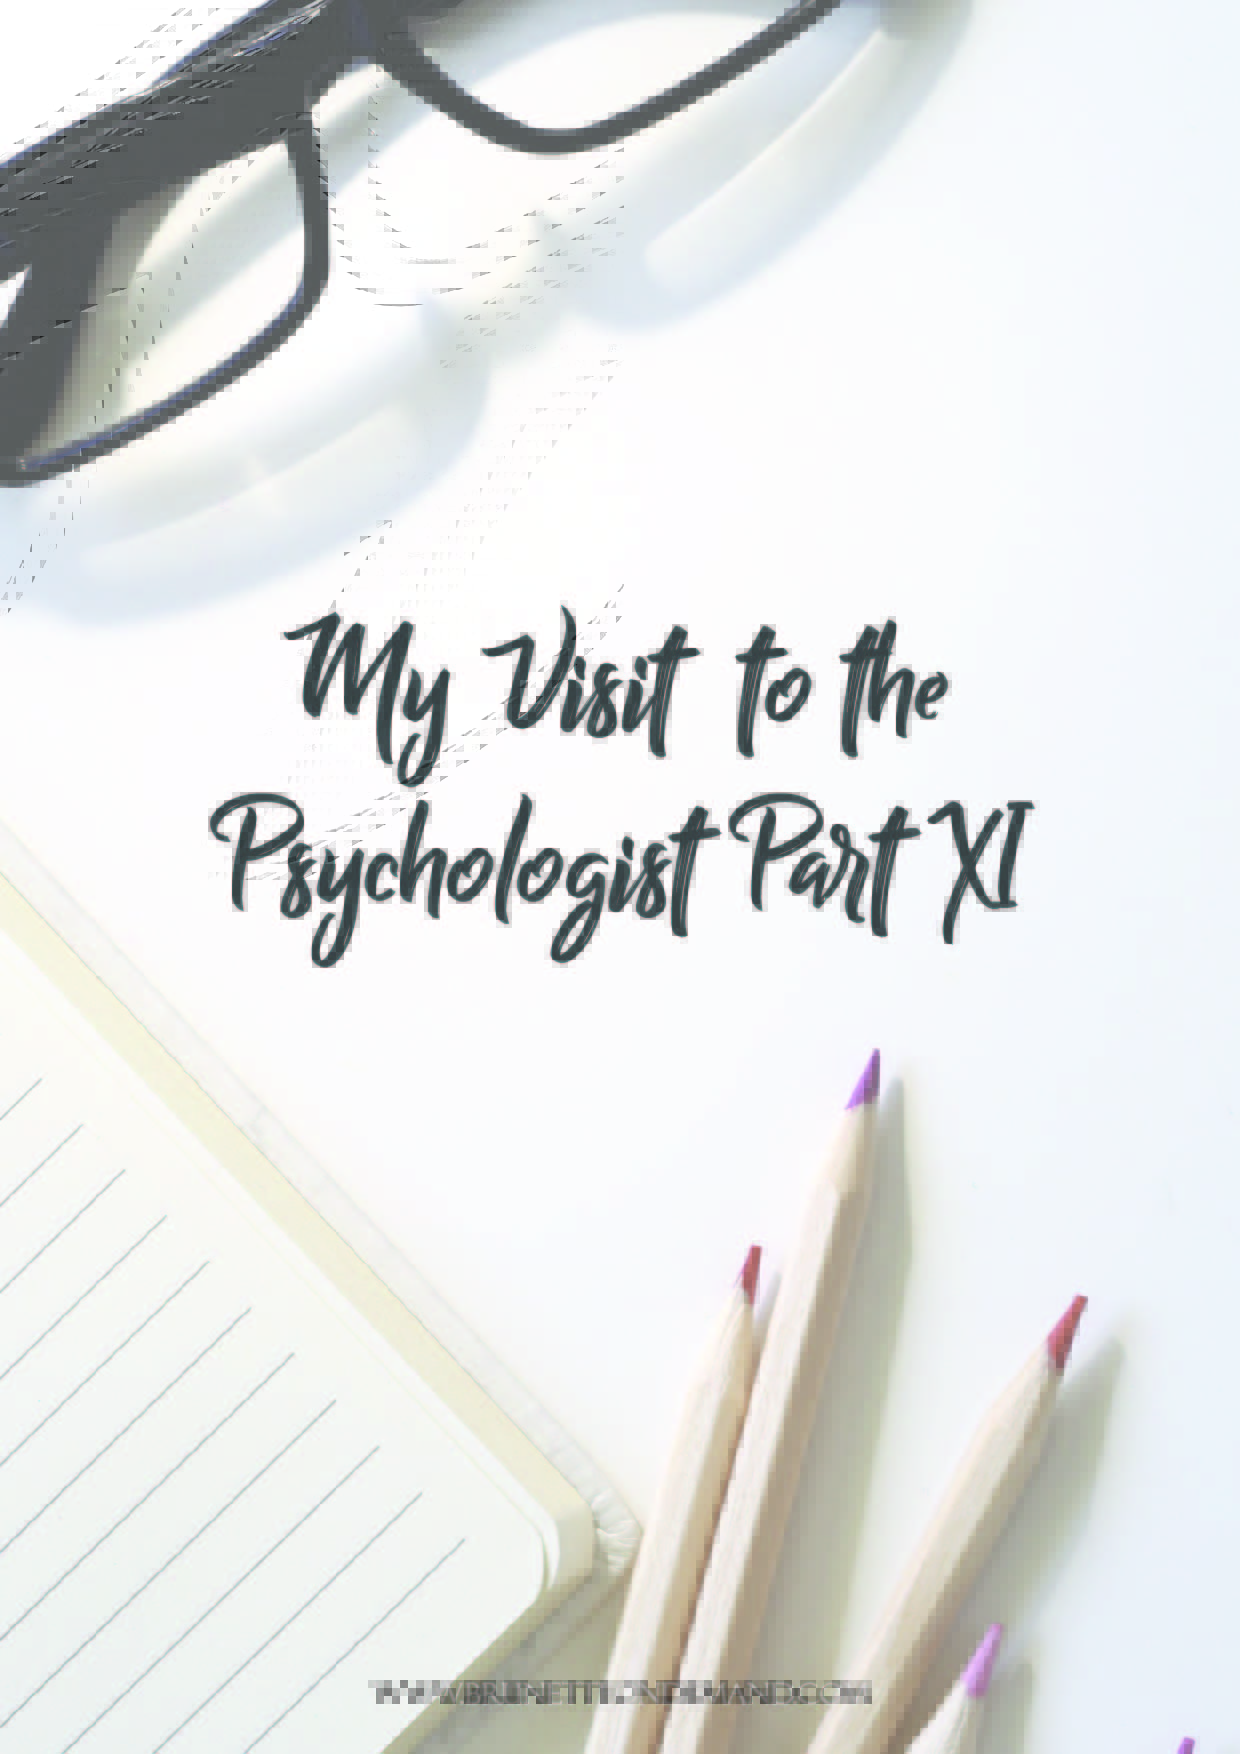 My Visit To The Psychologist Part XI